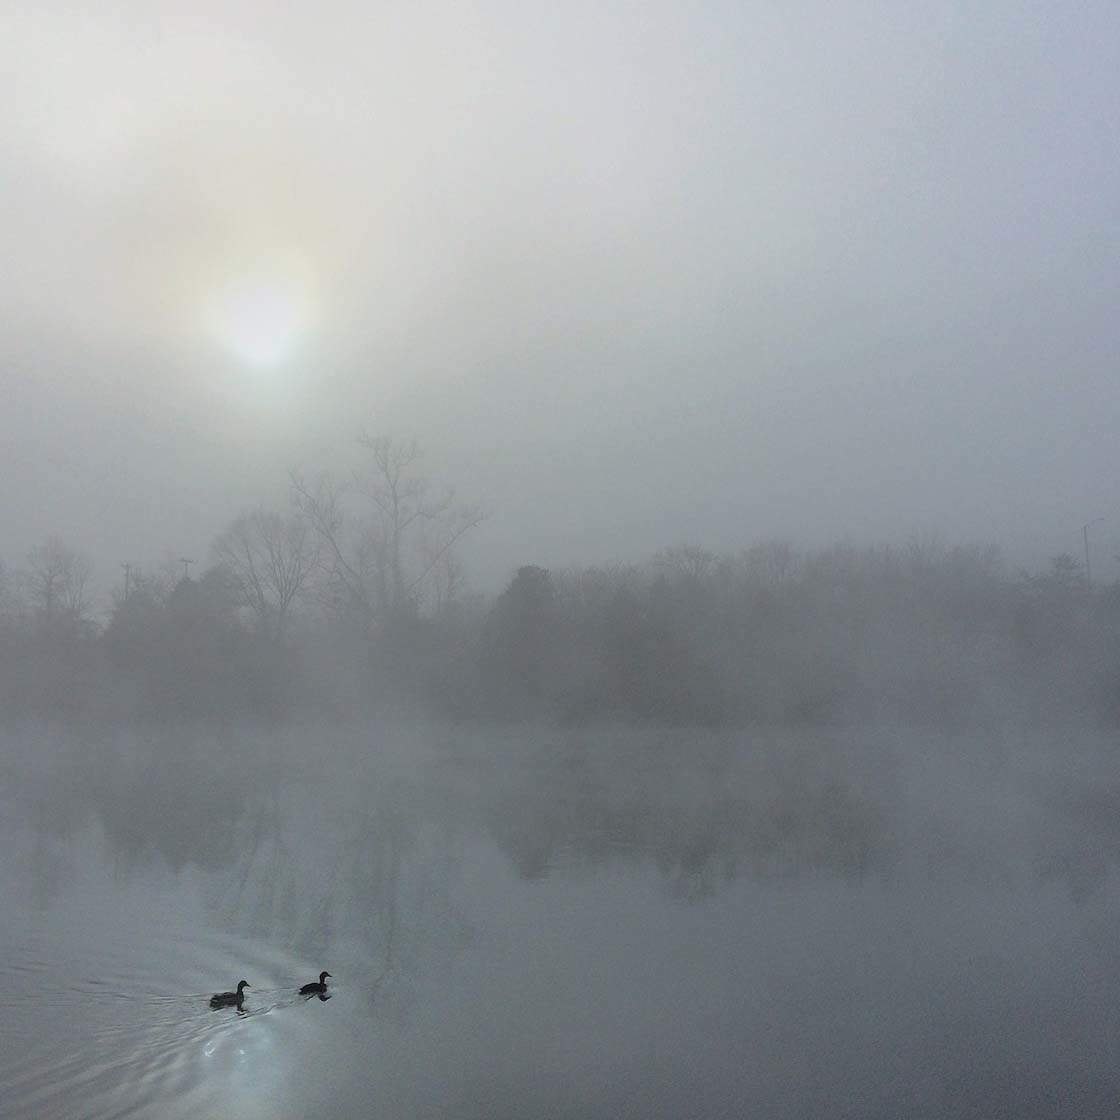 10 Tips For Taking Beautiful Iphone Photos In Mist And Fog